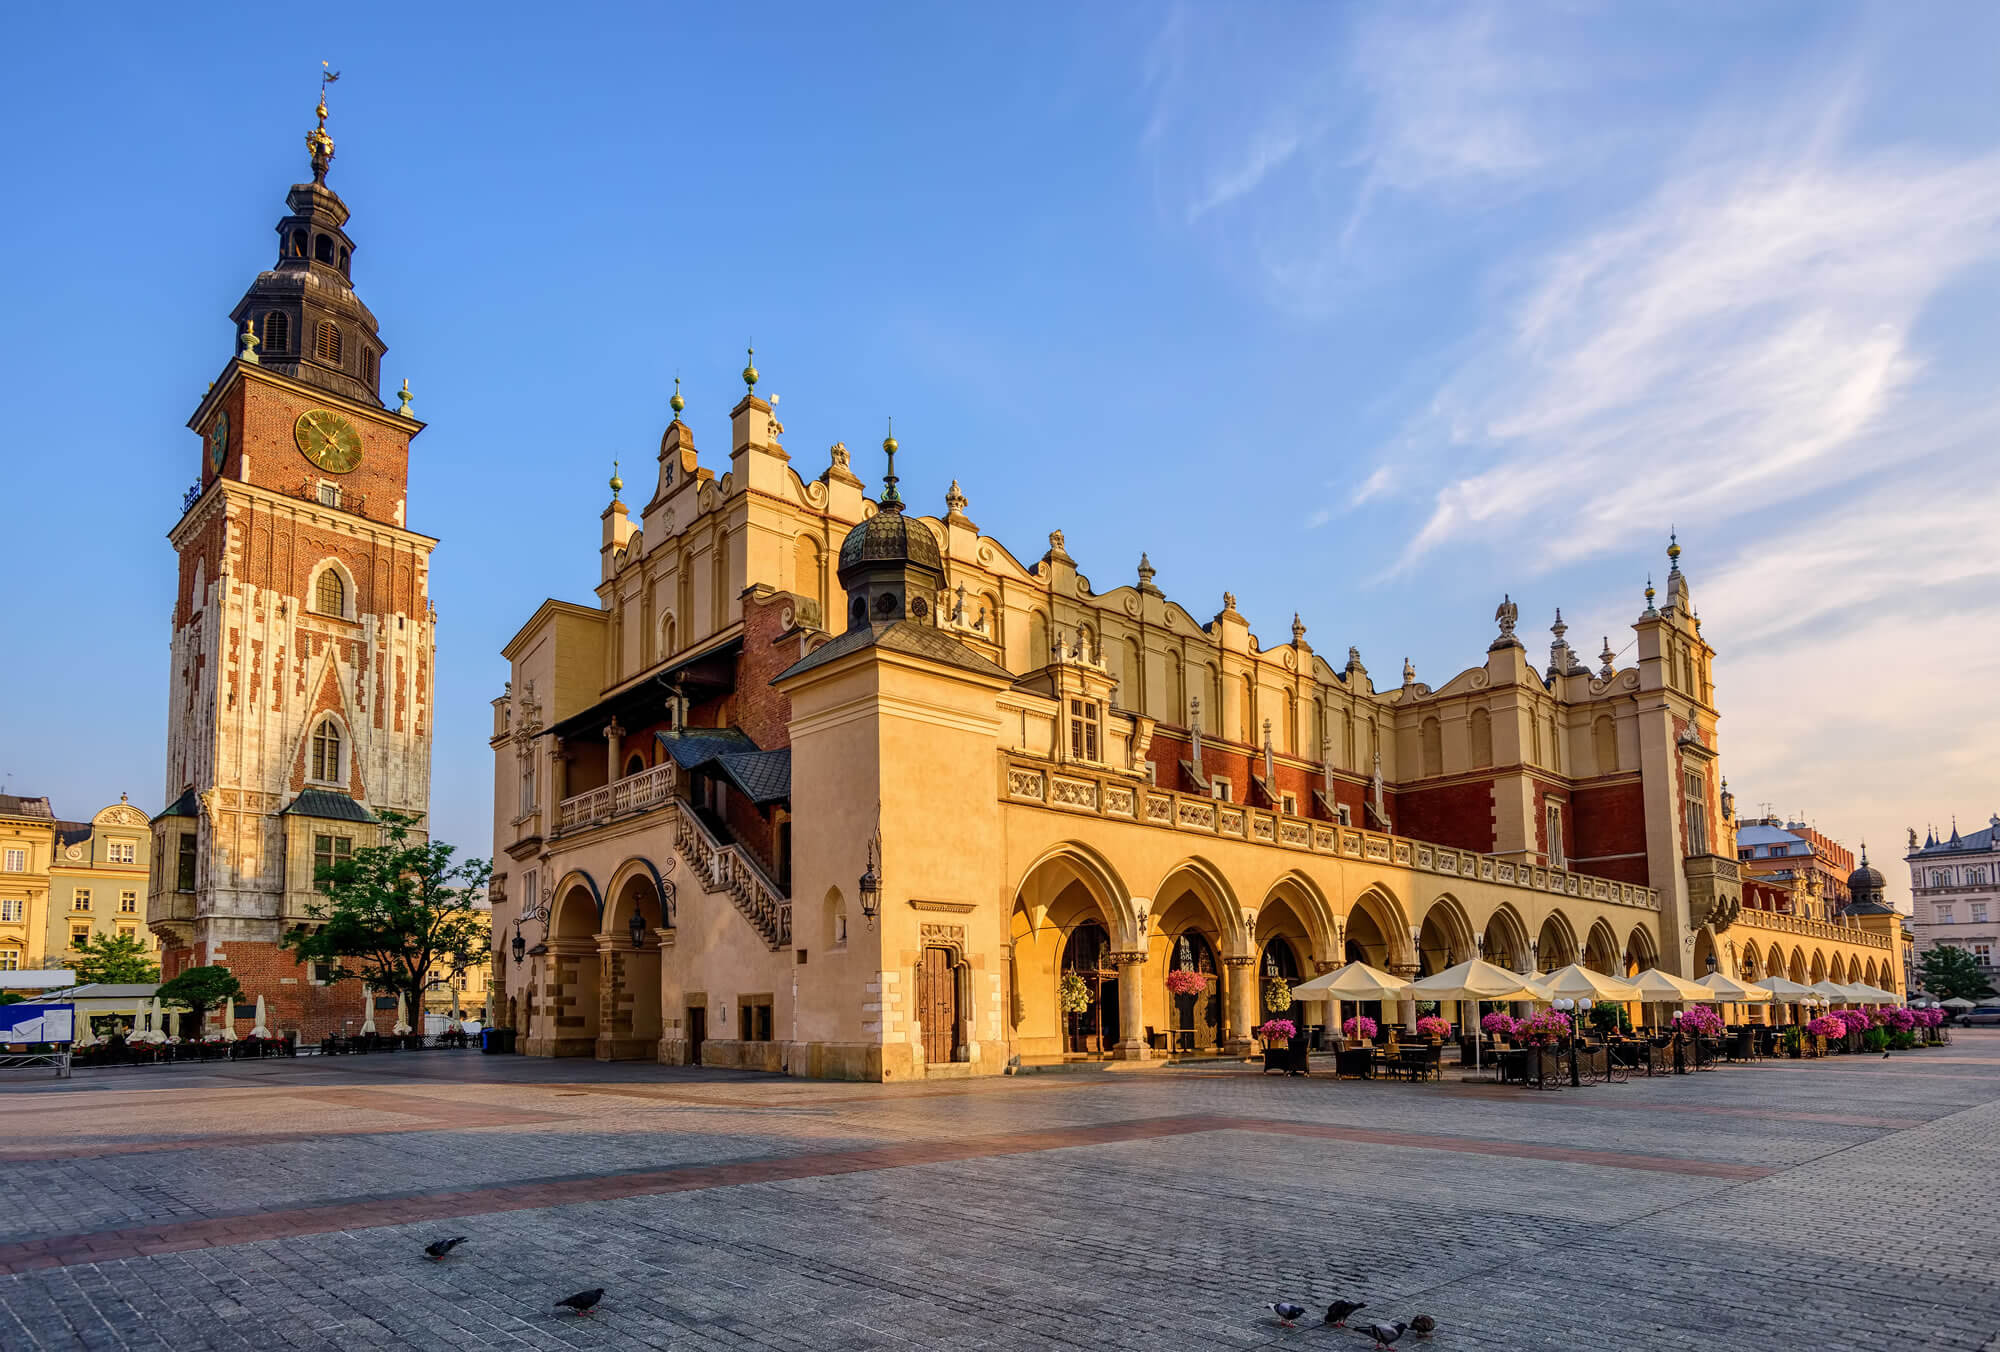 Town Hall Tower in Krakow